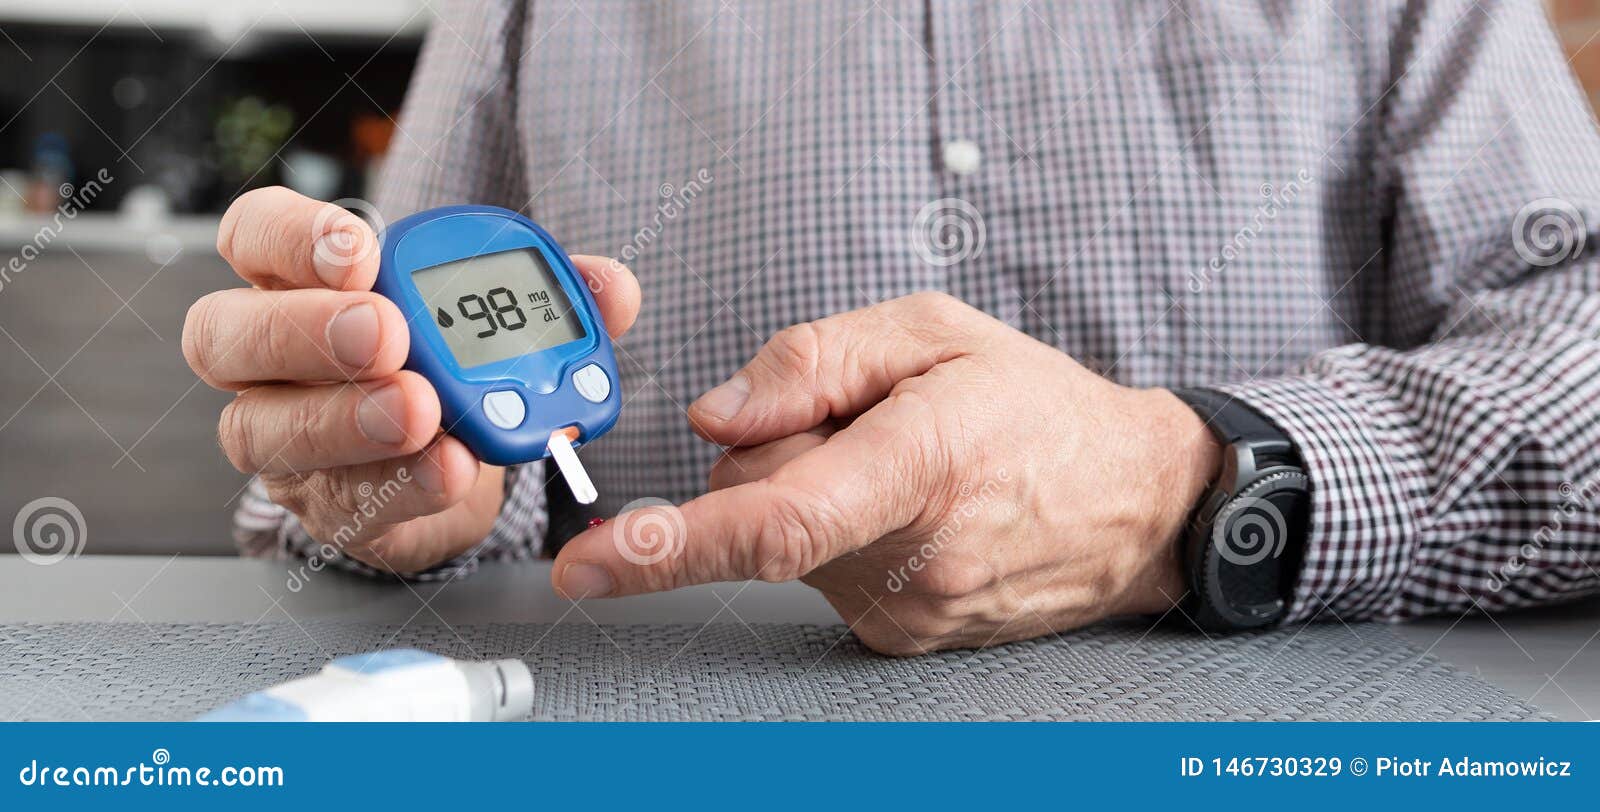 how to check my blood sugar level at home